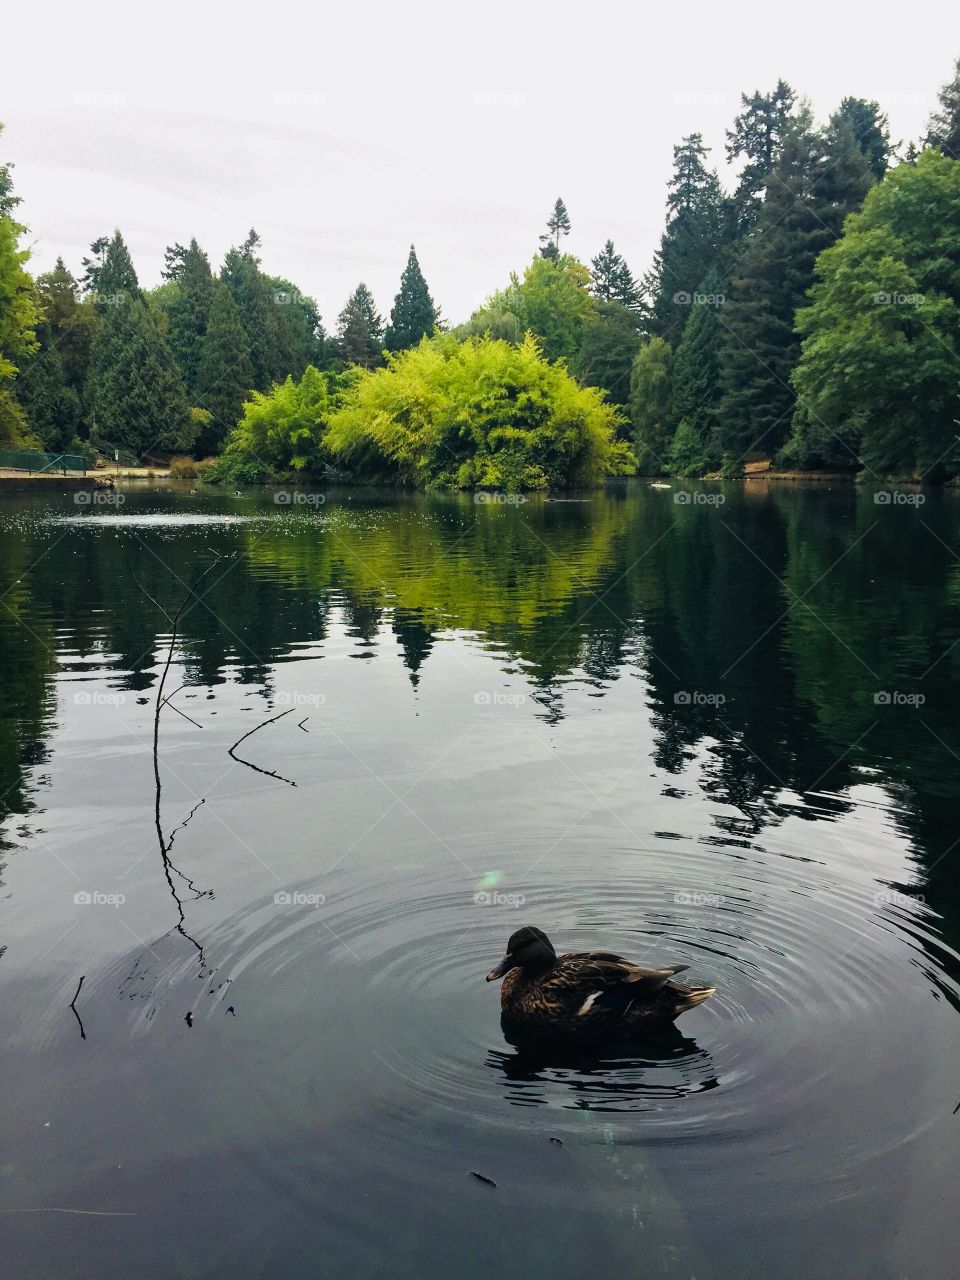 Duck floating on the water in Laurelhurst Park in Portland, Oregon with a lush forest backdrop